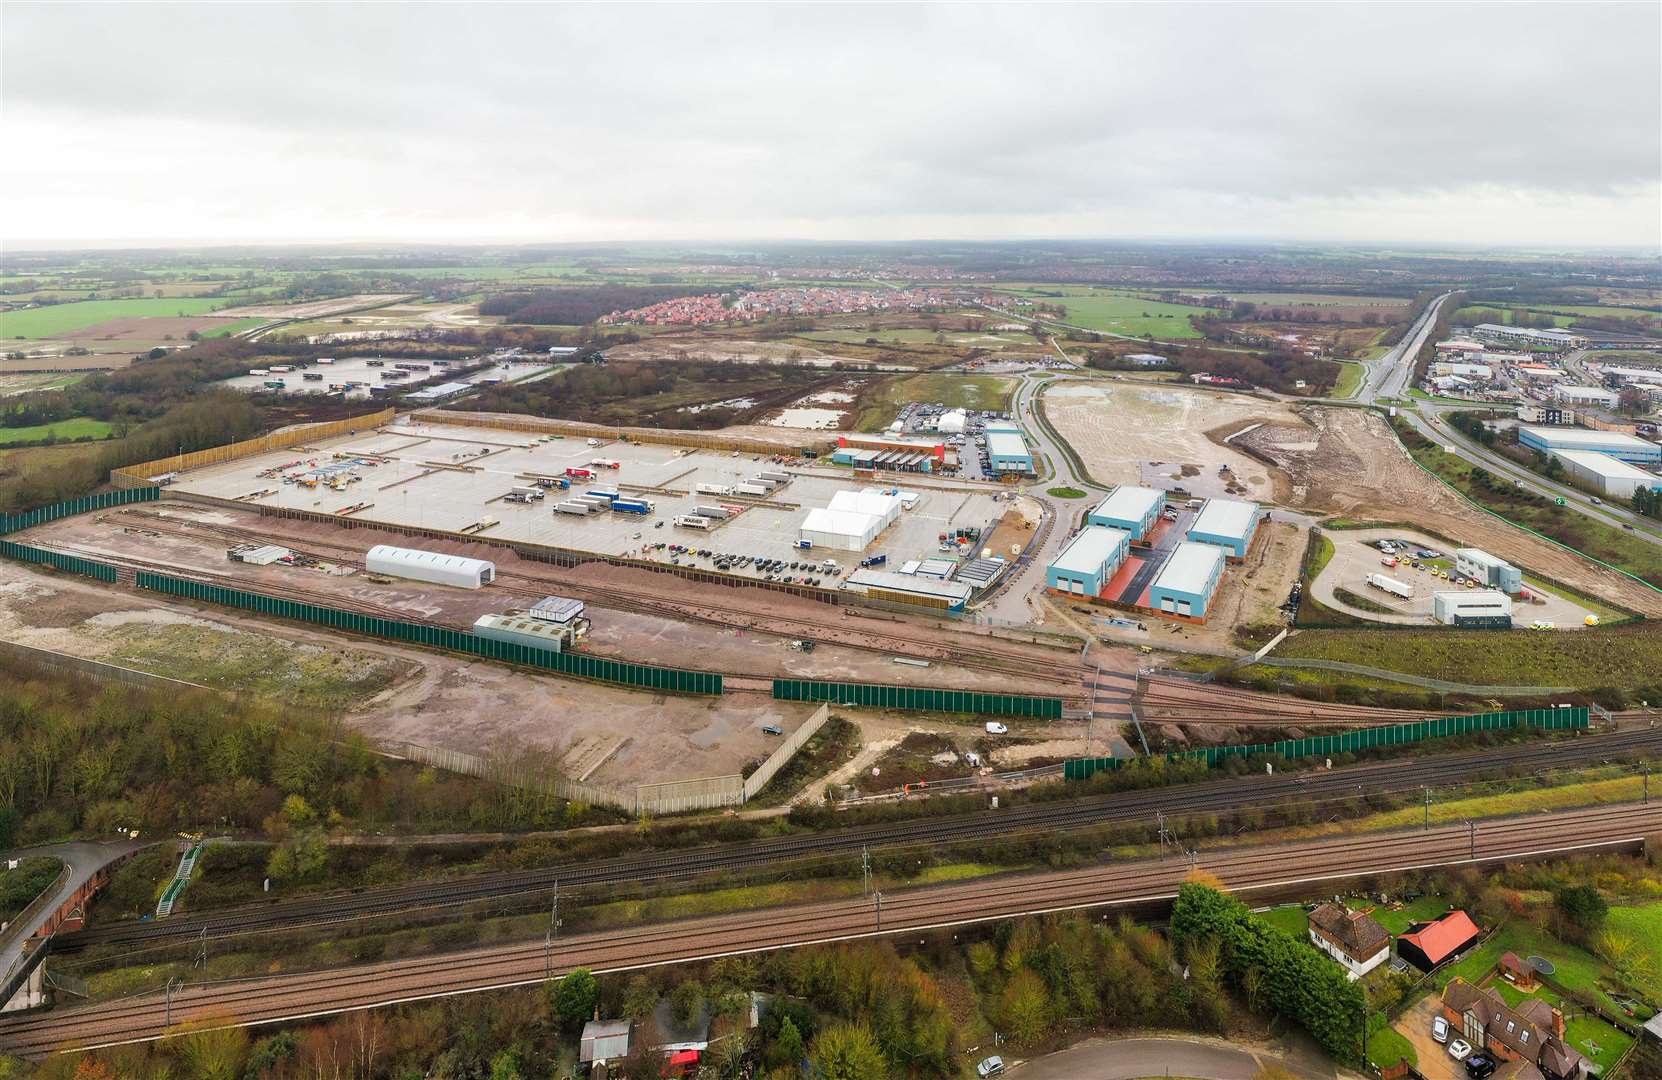 The Waterbrook Park site from above. Picture: Esprit Drone Services